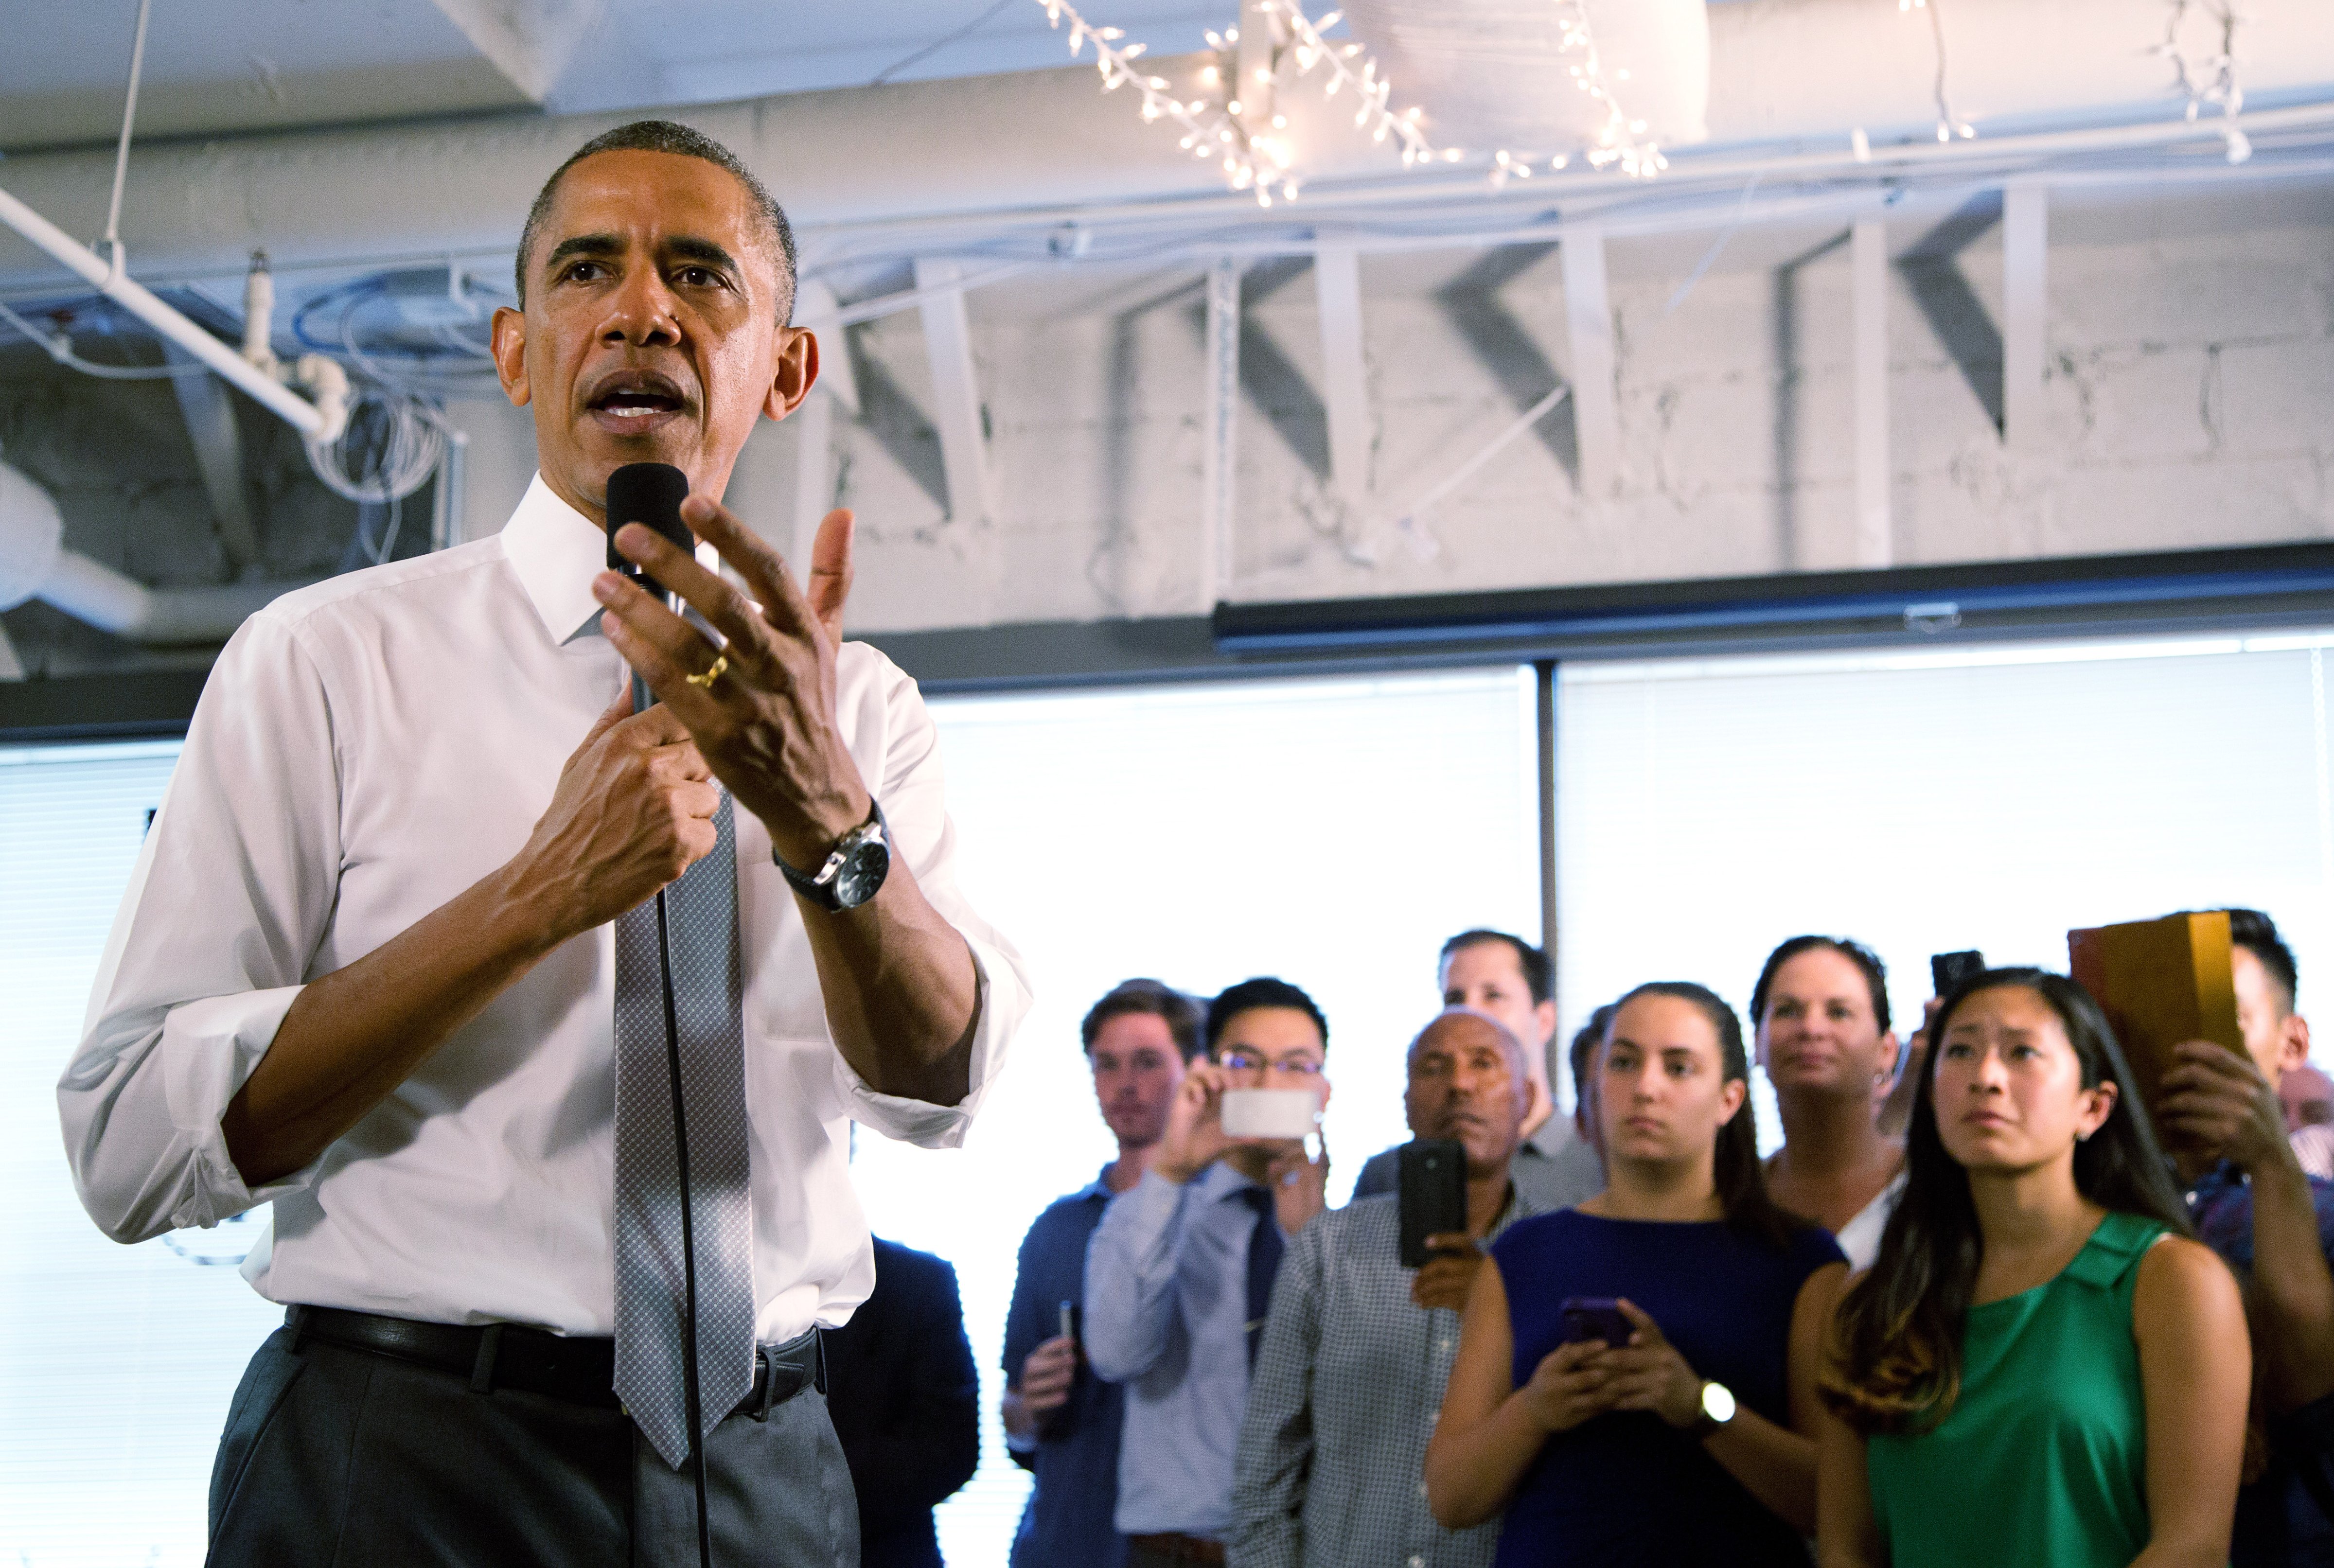 U.S. President Barack Obama speaks about the economy at the technology start-up hub "1776" July 3, 2014 in Washington, DC. (Pool—Getty Images)